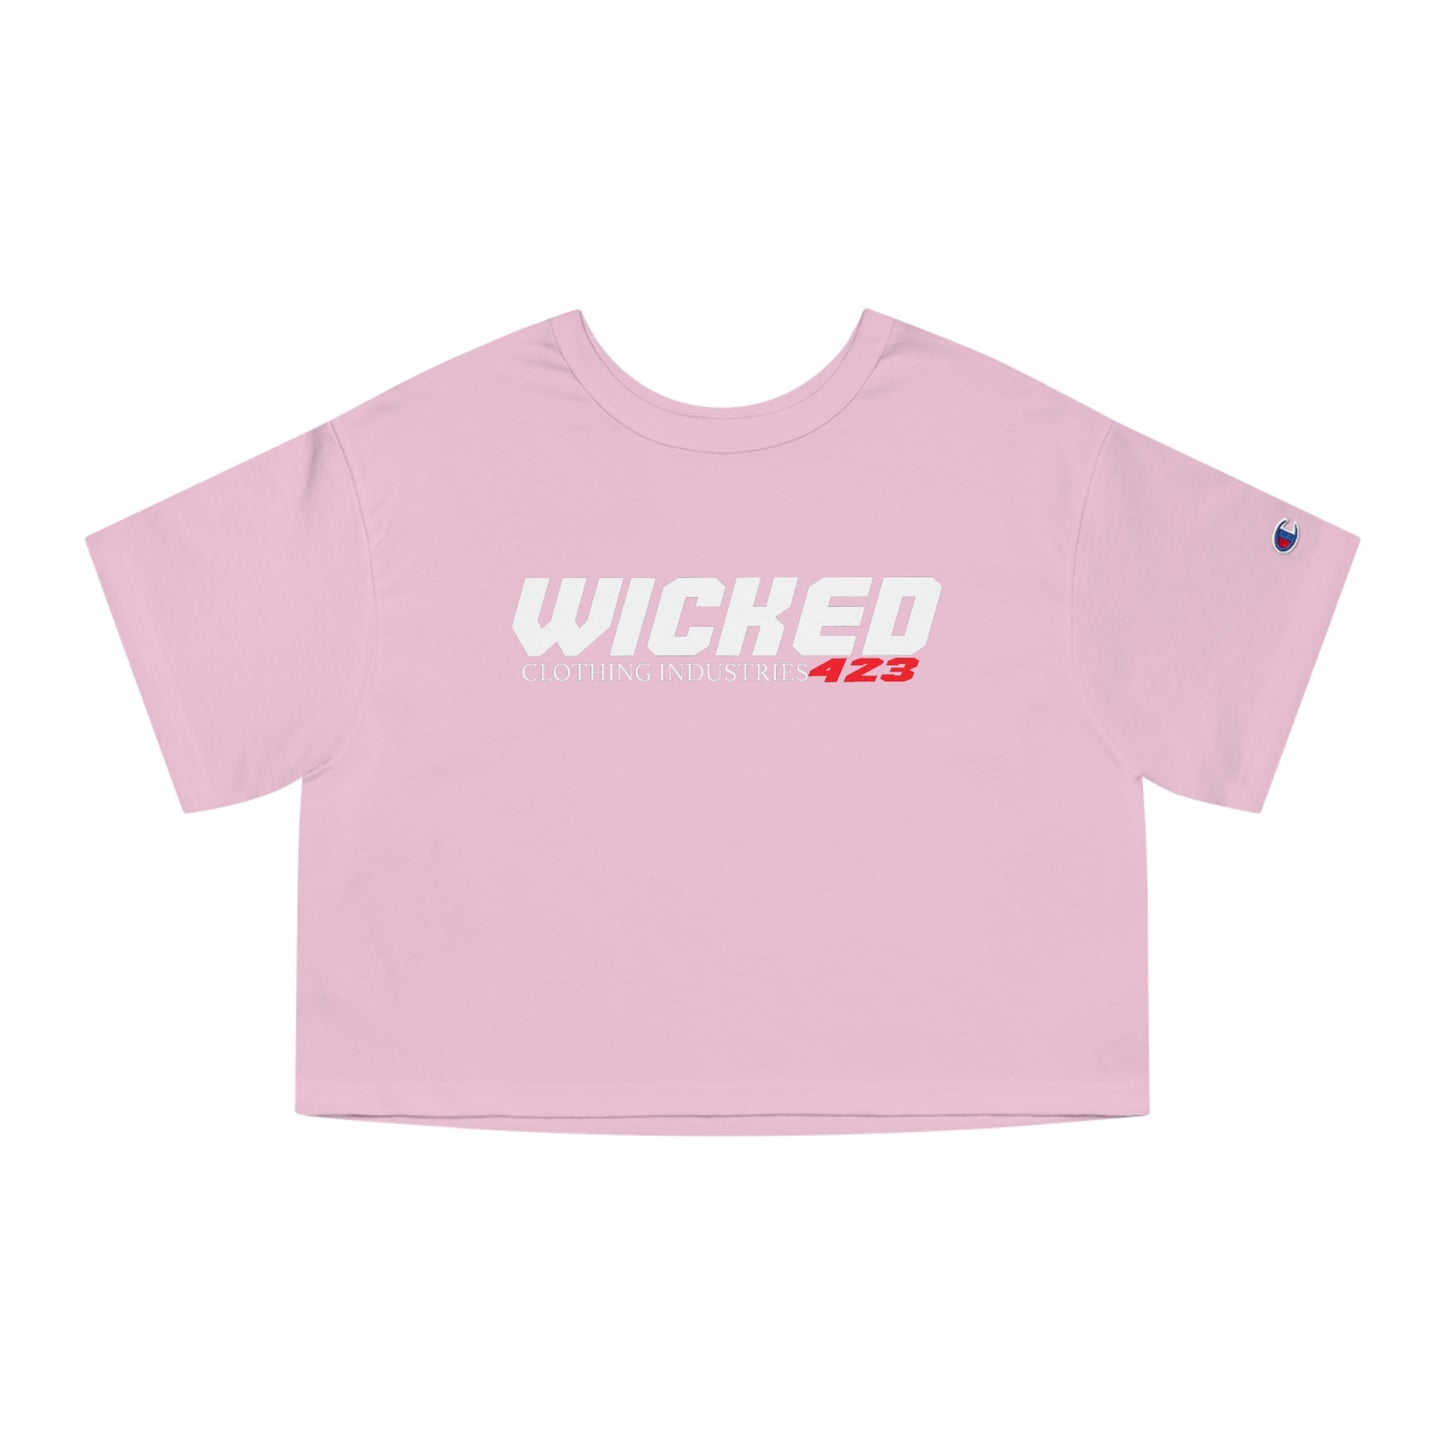 Wicked 423/ Cropped T-Shirt